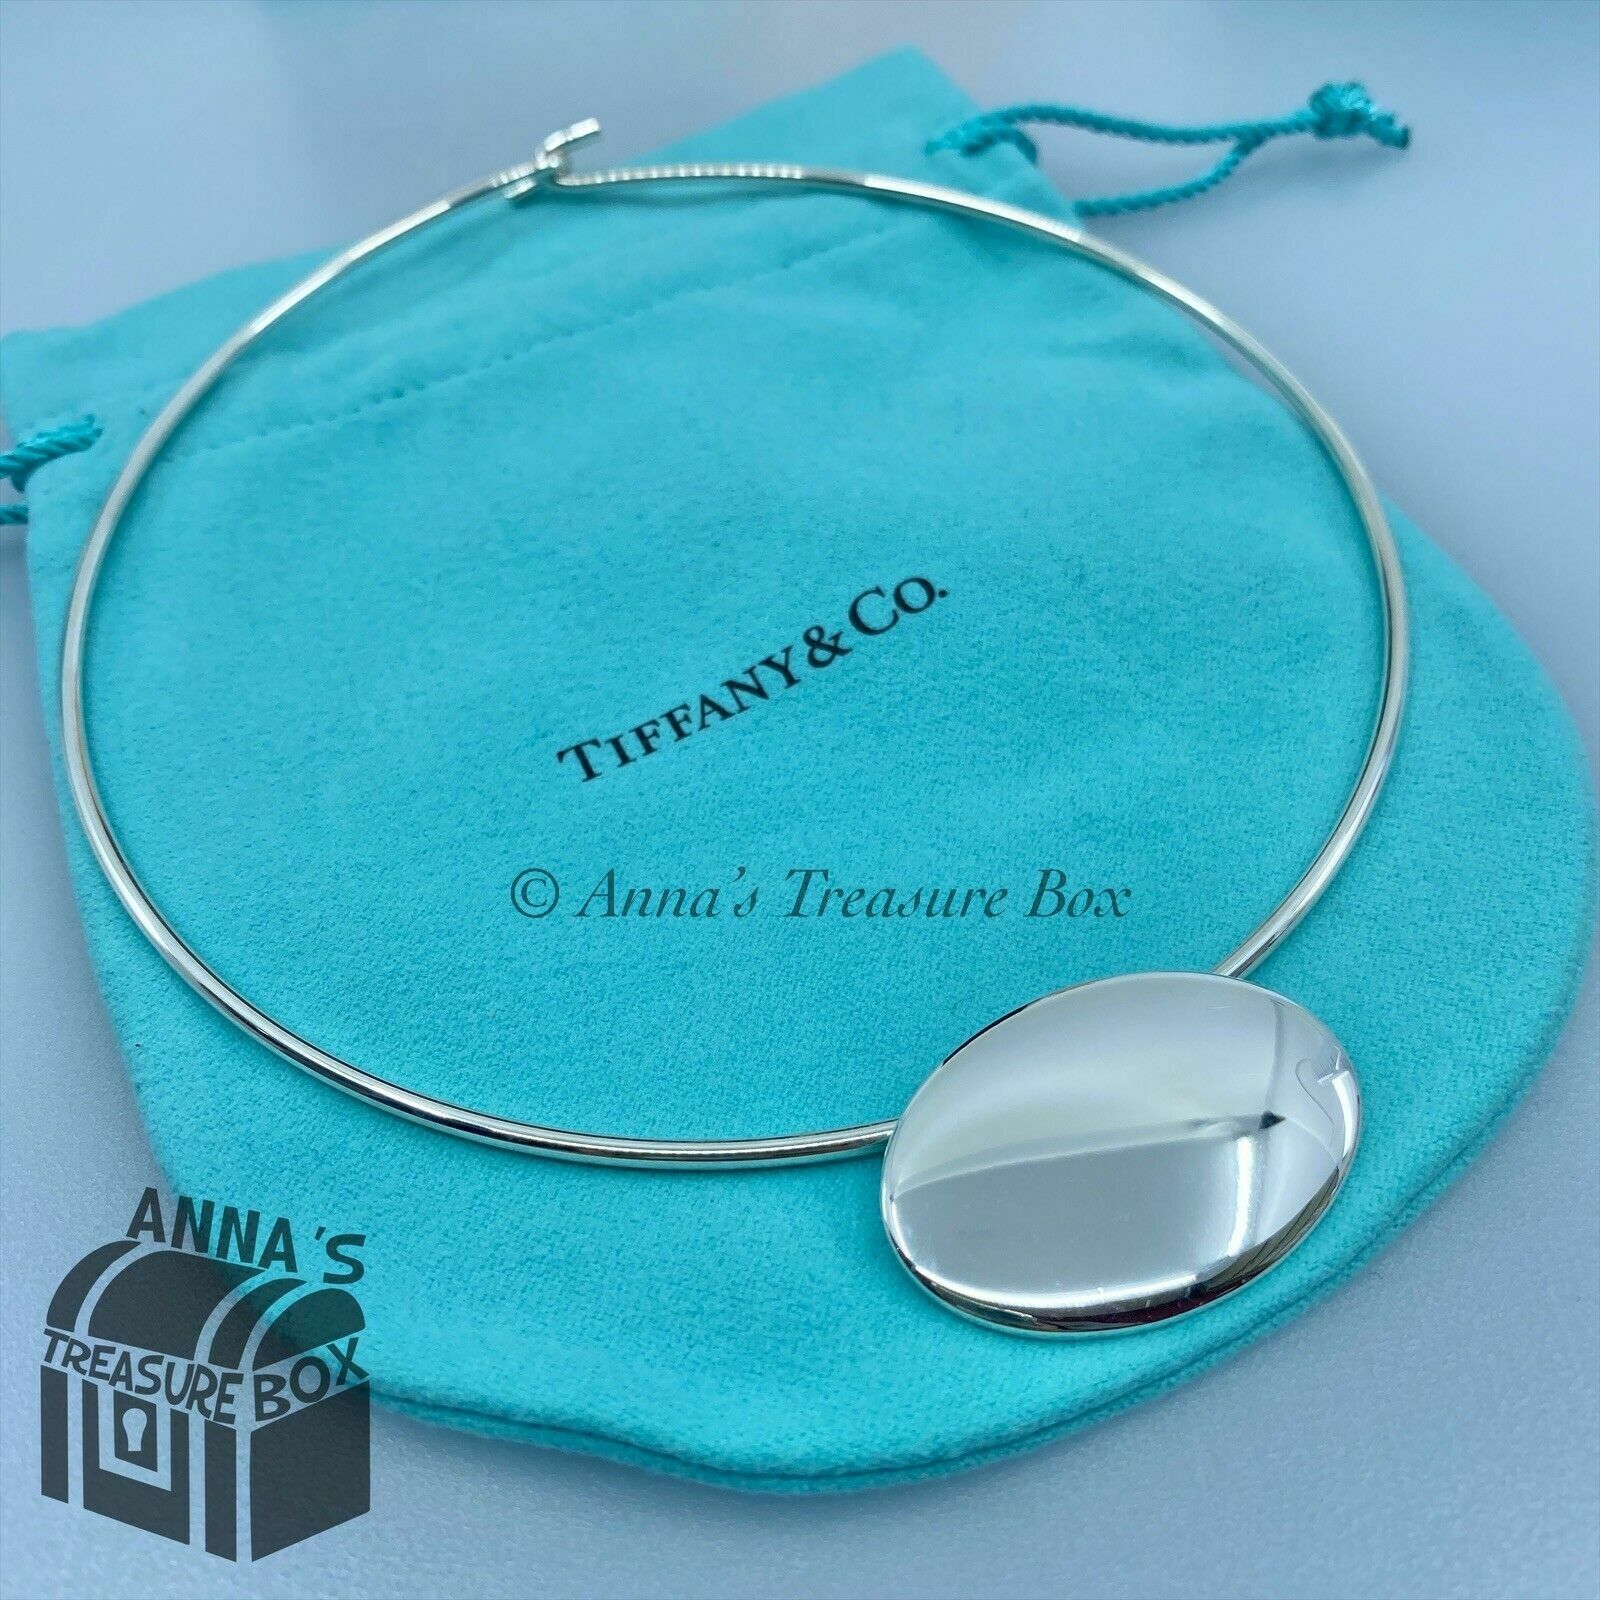 1 Meter 925 Sterling Silver Wire Jewelry Making  0.3/0.4/0.5/0.6/0.7/0.8/0.9/1/1.2mm Tarnish Resistant Silver Coil Wire 